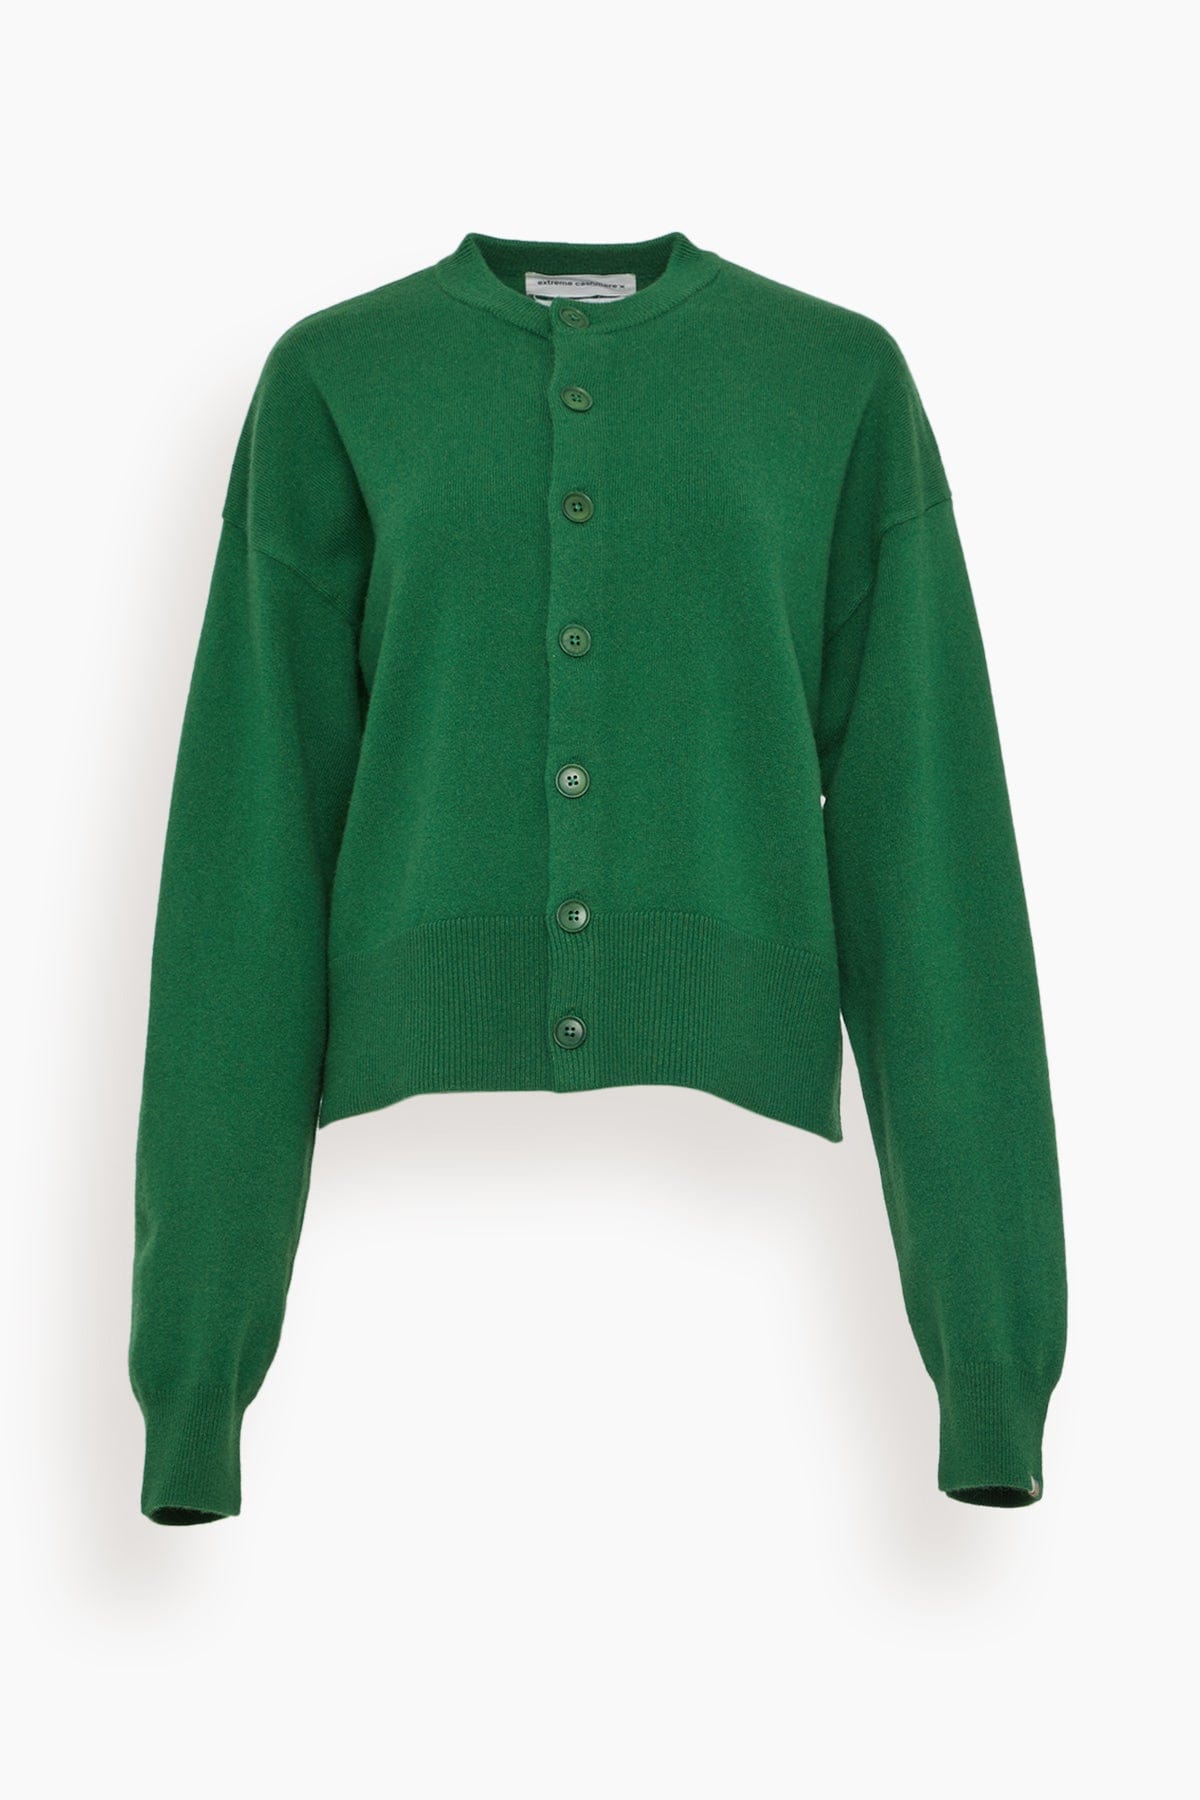 Extreme Cashmere Sweaters Chou Cardigan in Weed